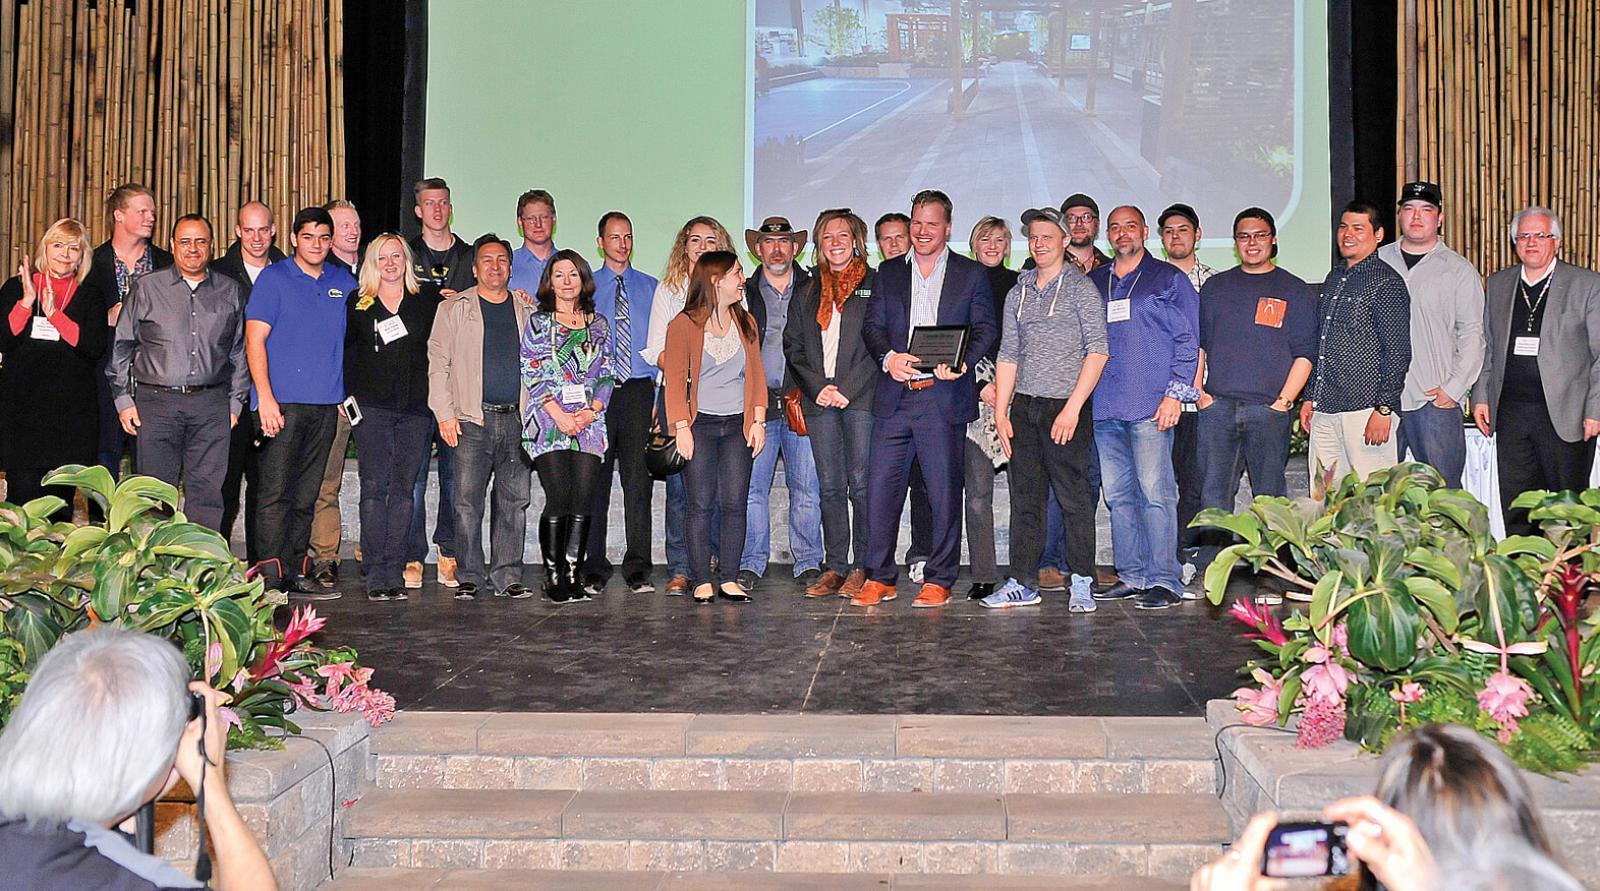 Award winners took the stage at Industry Night, Mar. 19.